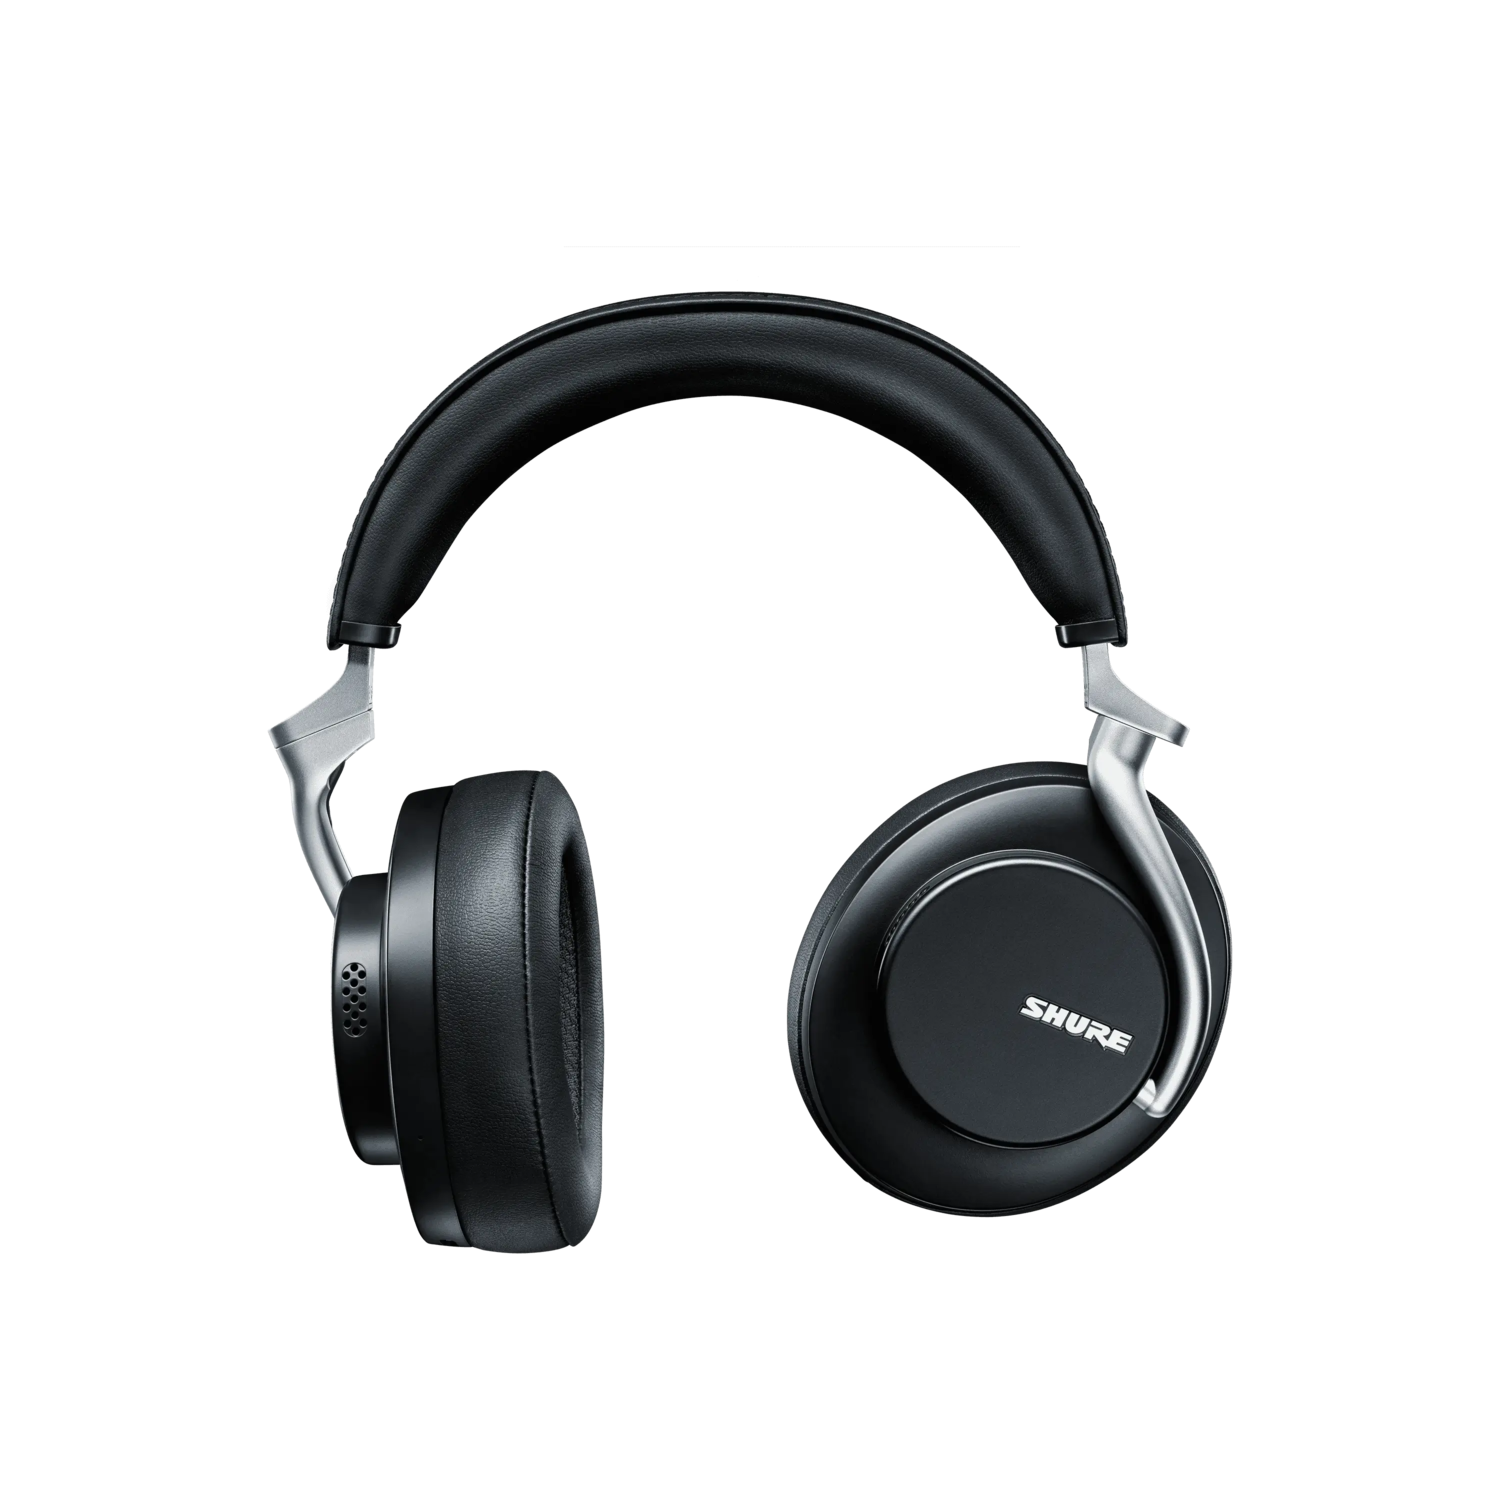 AONIC 50 - Wireless Noise Cancelling Headphones - Shure United 